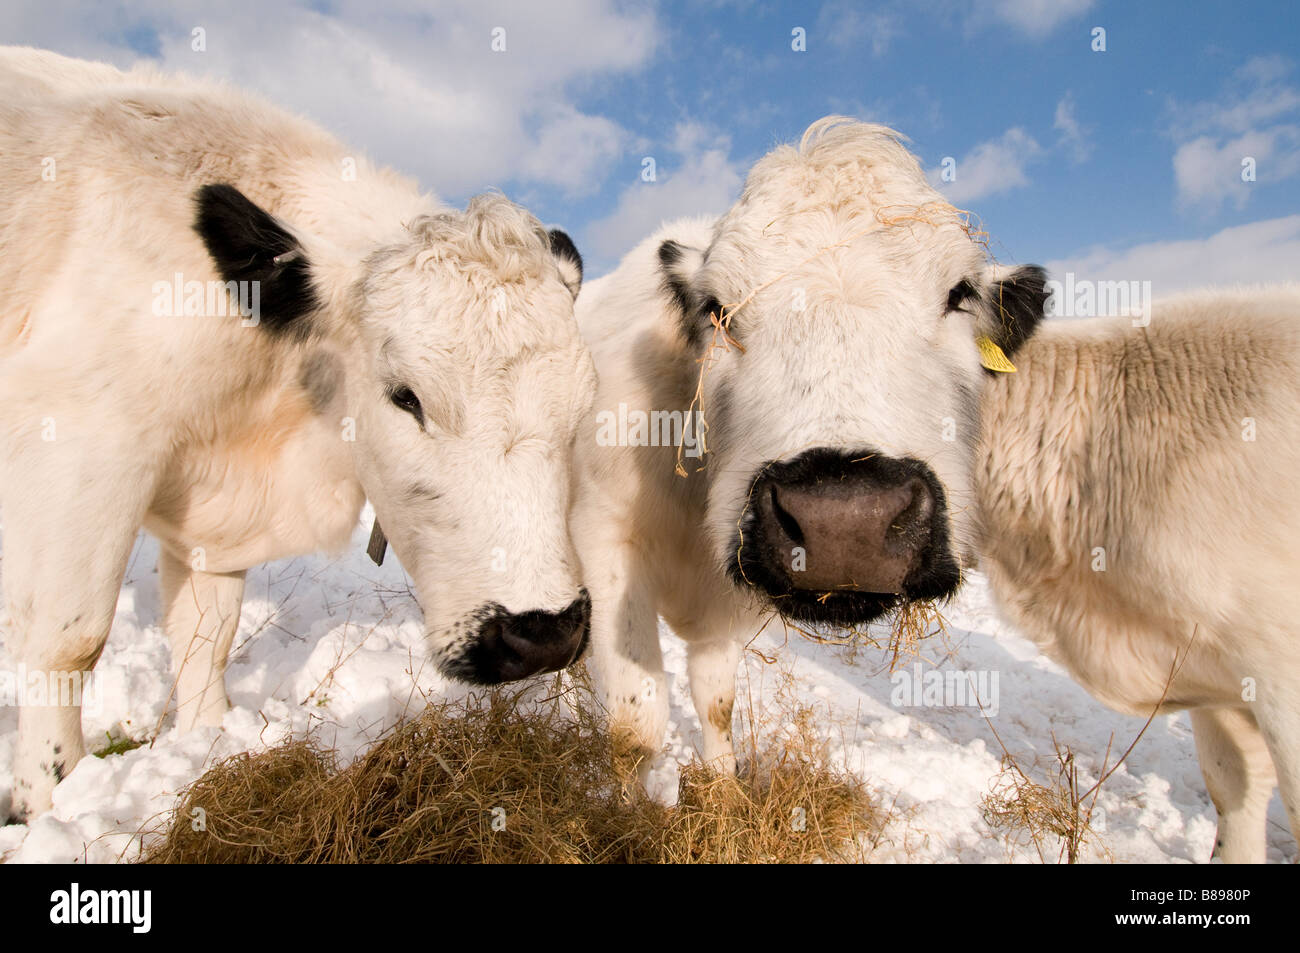 'British white' cows eating hay in winter Stock Photo